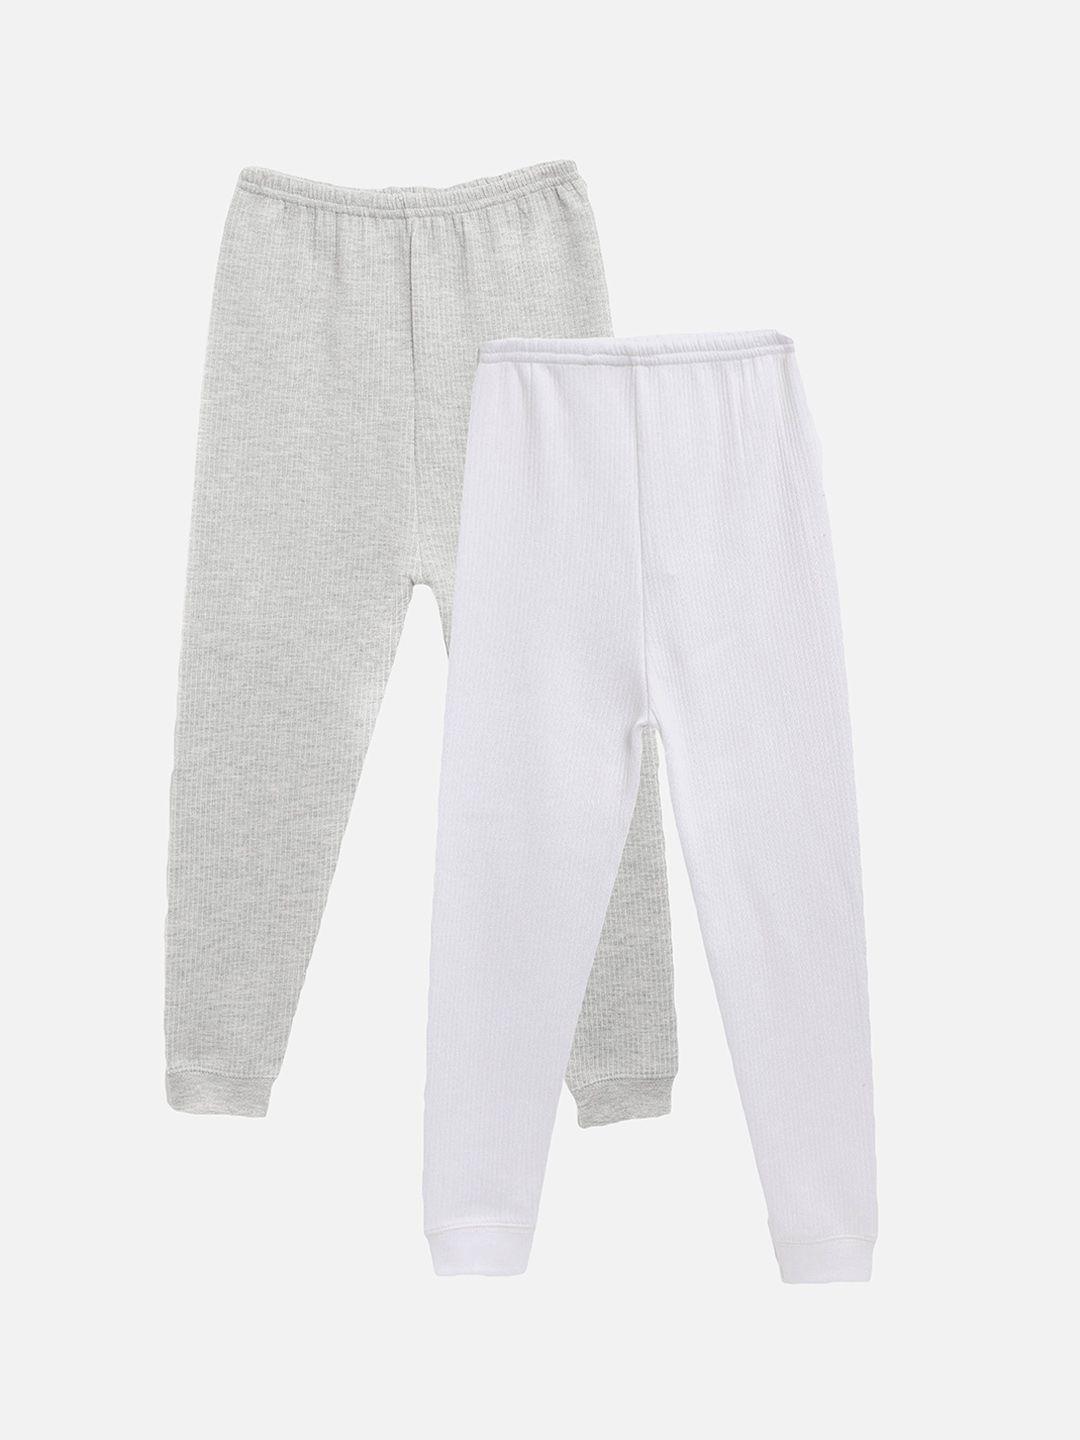 kanvin boys pack of 2 white and grey melange thermal bottoms